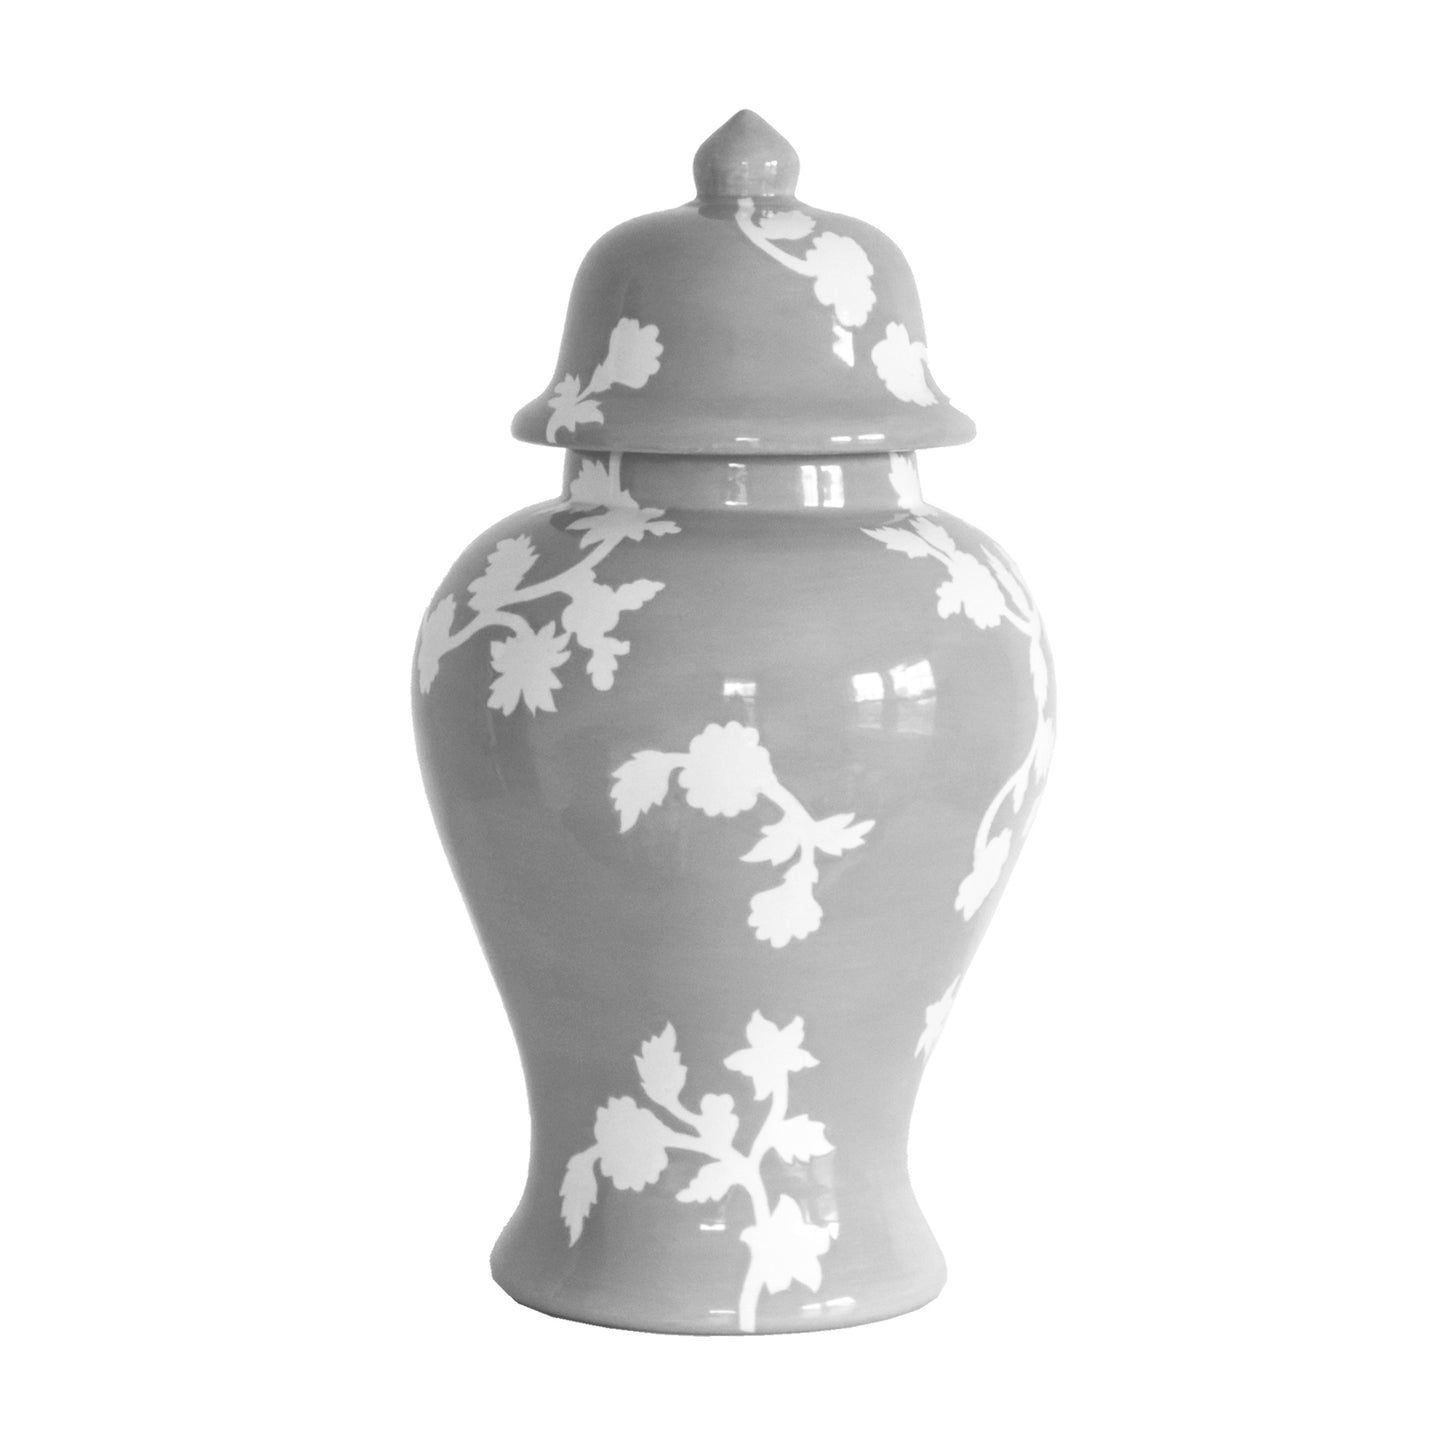 Chinoiserie Dreams Ginger Jars in Light Gray